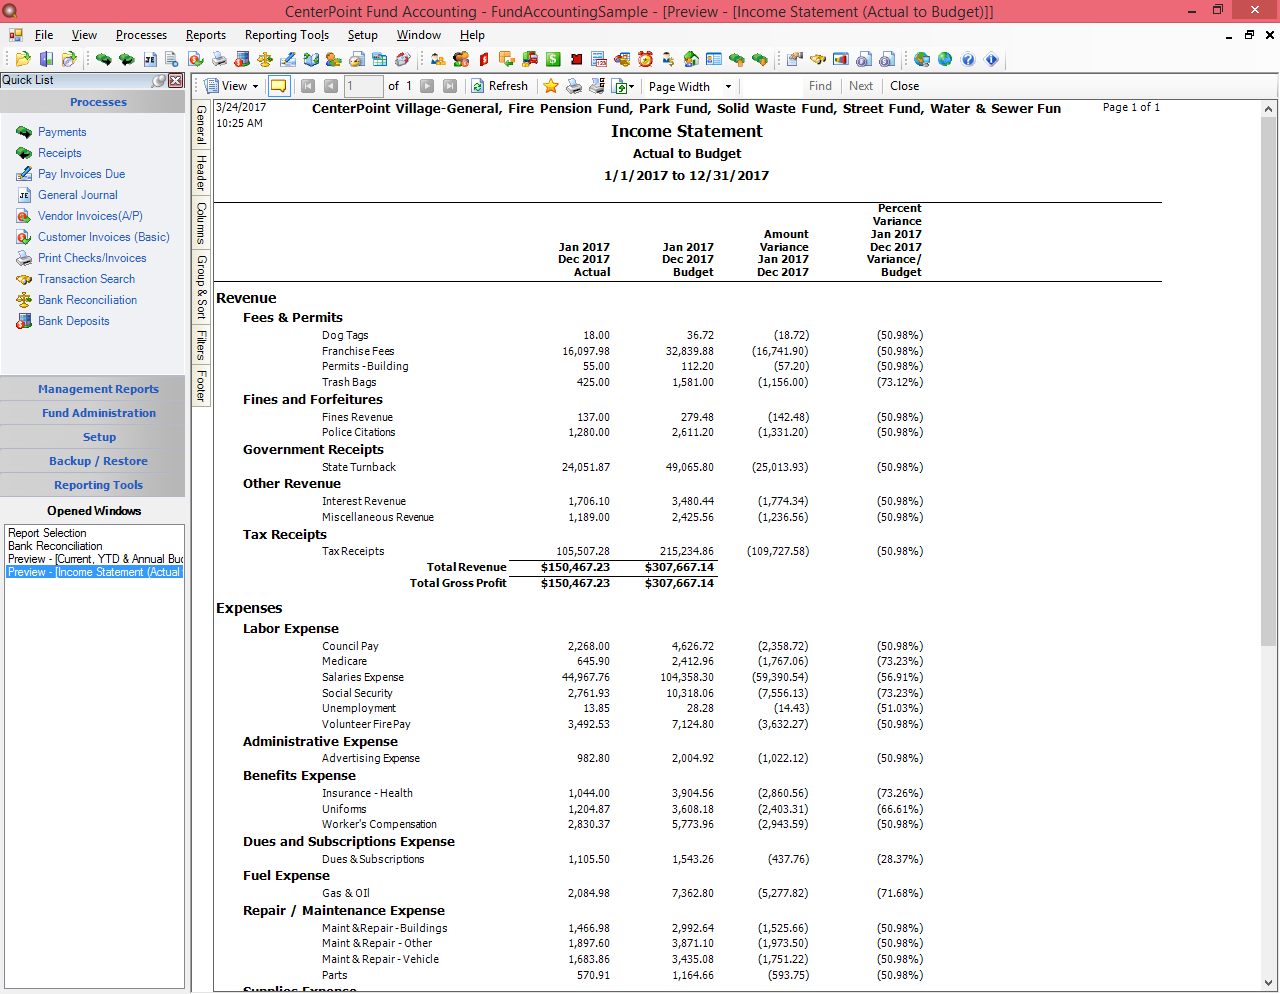 CenterPoint Fund Accounting for Municipals income statement